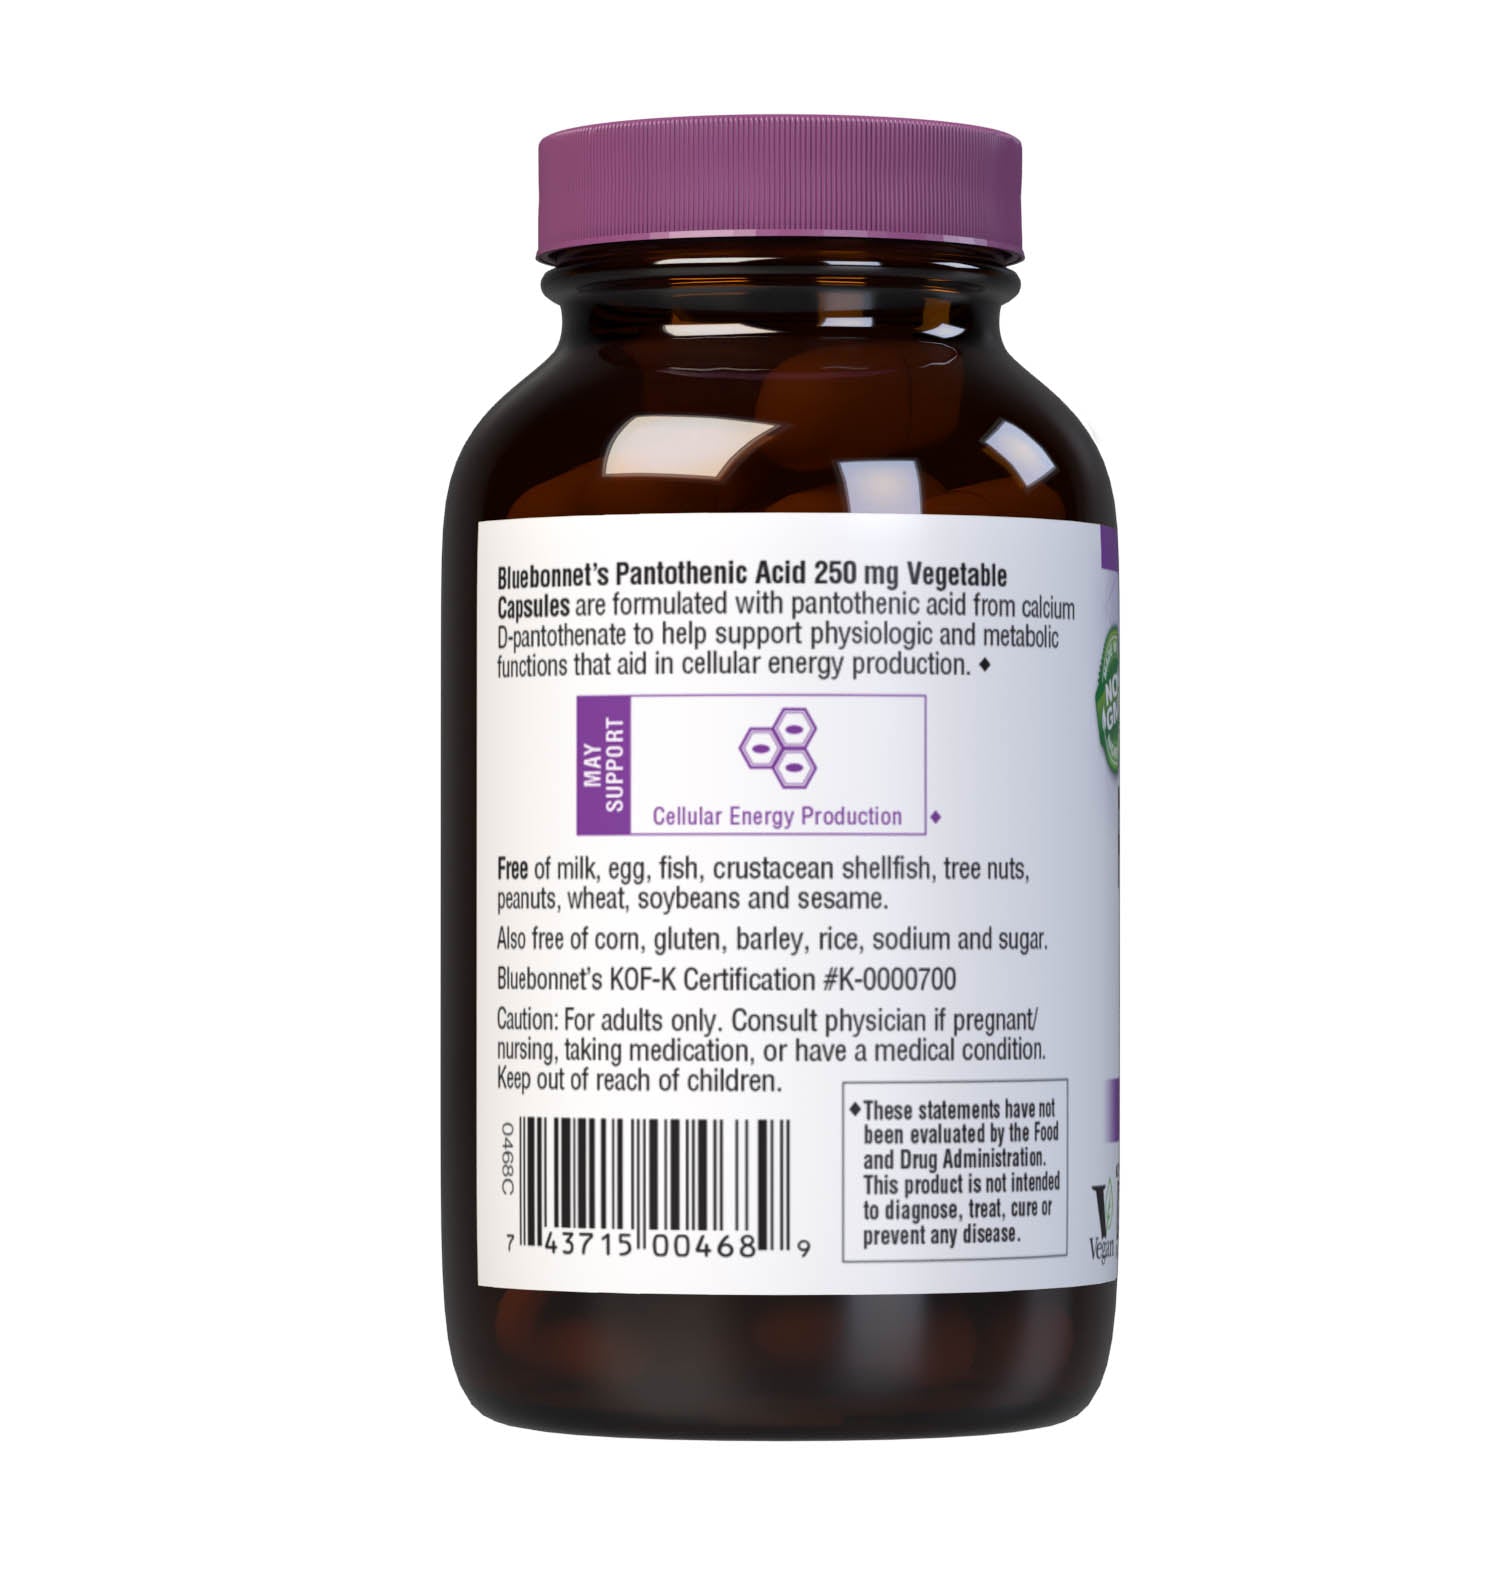 Bluebonnet’s Pantothenic Acid 250 mg 60 Vegetable Capsules provide pantothenic acid from calcium D-pantothenate. Tested for potency and purity in our own state-of-the-art laboratory. Description panel. #size_60 count